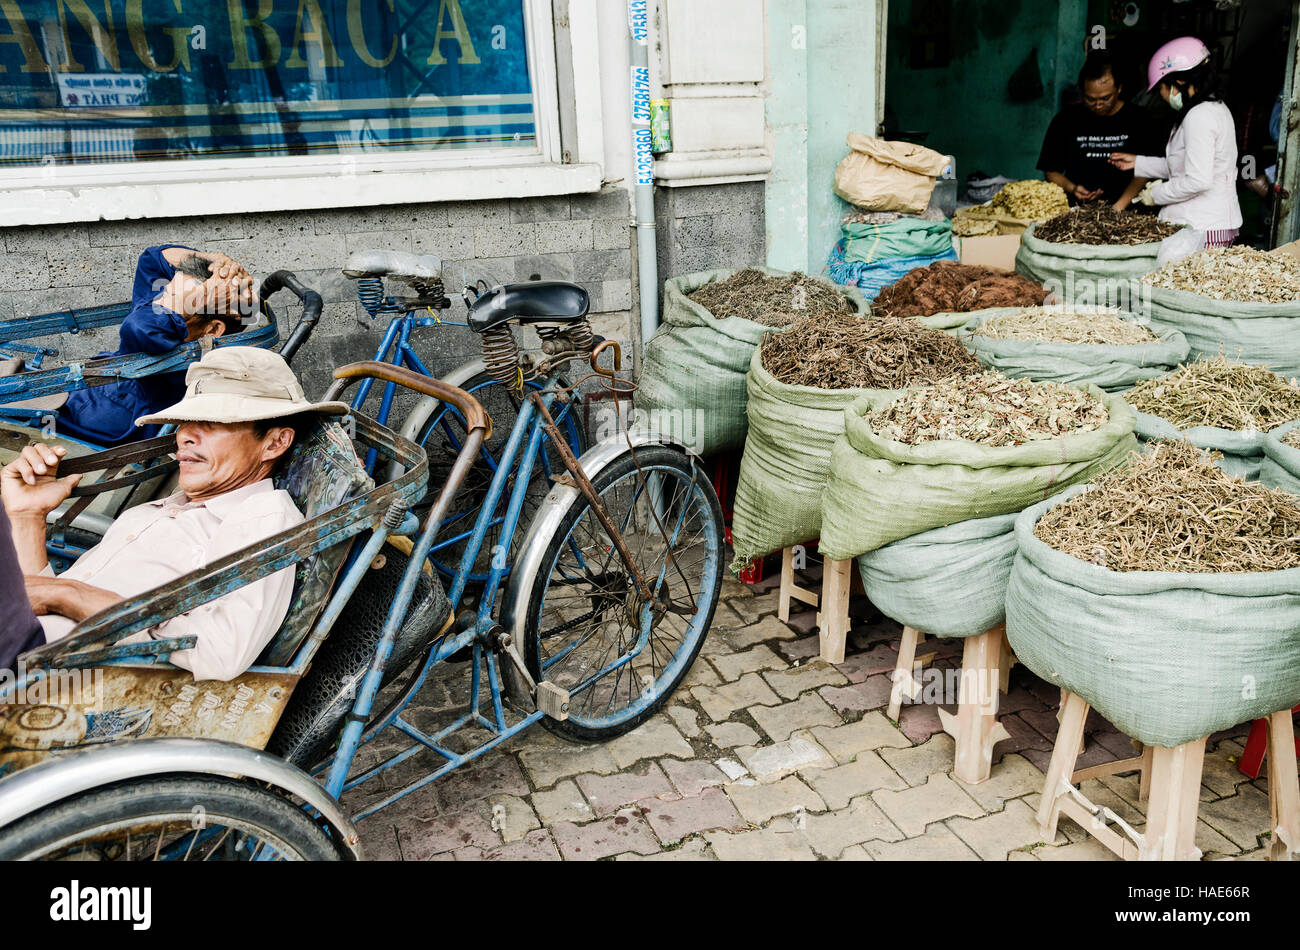 cyclo taxi drivers and herbal shop in saigon ho chi minh city street in vietnam Stock Photo